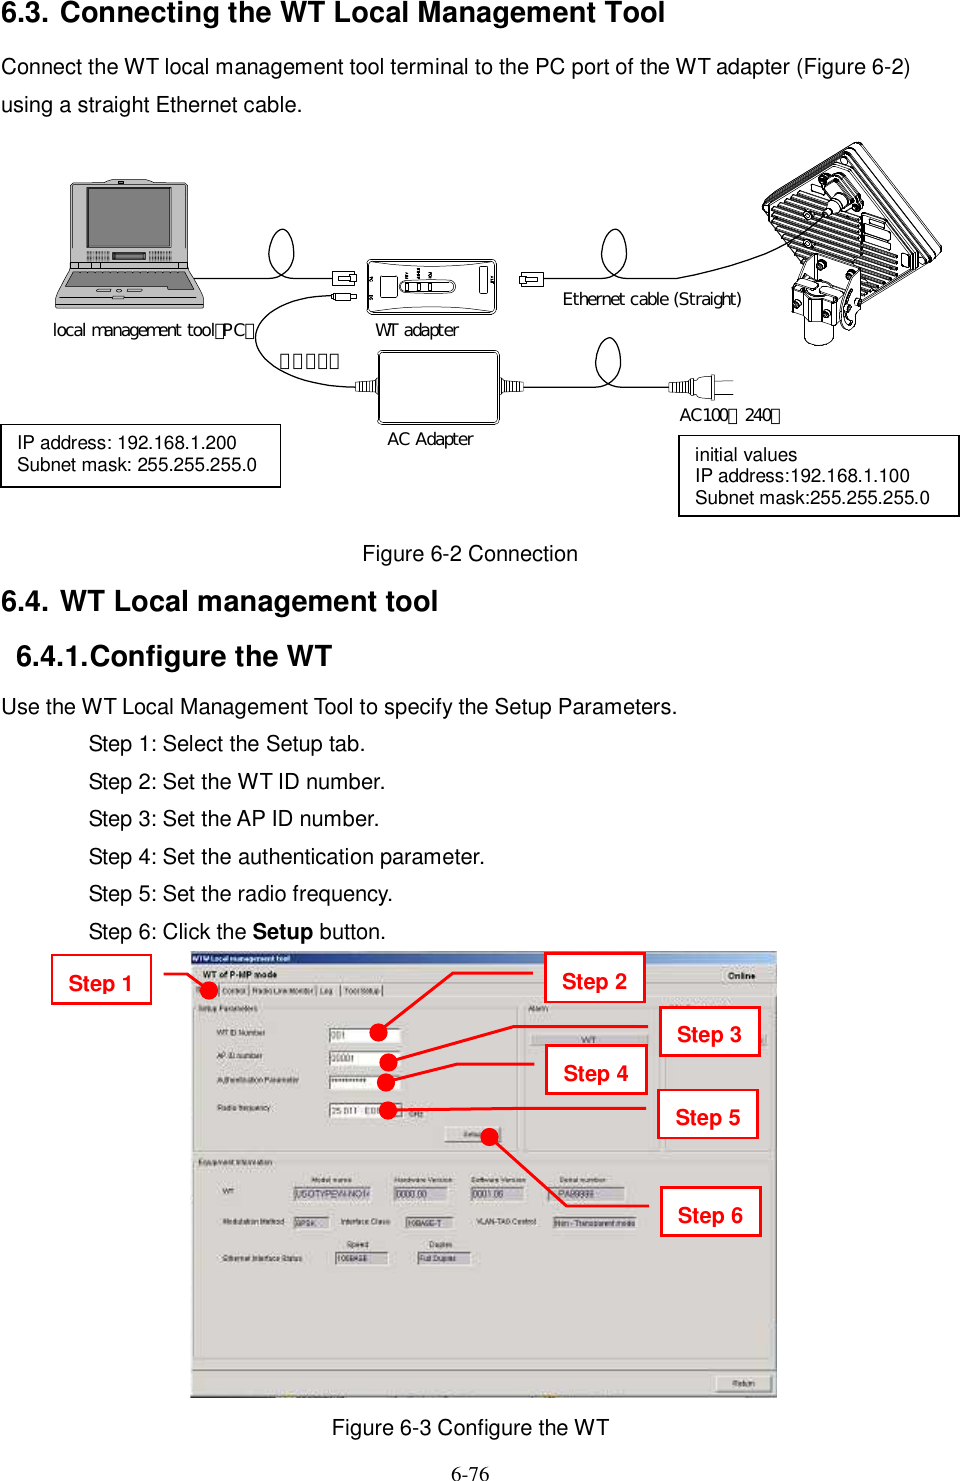   6-76   6.3. Connecting the WT Local Management Tool Connect the WT local management tool terminal to the PC port of the WT adapter (Figure 6-2) using a straight Ethernet cable.  Figure 6-2 Connection 6.4. WT Local management tool 6.4.1. Configure the WT Use the WT Local Management Tool to specify the Setup Parameters. Step 1: Select the Setup tab. Step 2: Set the WT ID number. Step 3: Set the AP ID number. Step 4: Set the authentication parameter. Step 5: Set the radio frequency. Step 6: Click the Setup button.                     Figure 6-3 Configure the WT IP address: 192.168.1.200 Subnet mask: 255.255.255.0  WT adapterAC Adapter AC100∼240ＶＤＣ２４Ｖlocal management tool（PC）Ethernet cable (Straight)initial values IP address:192.168.1.100 Subnet mask:255.255.255.0 Step 1   Step 2 Step 3 Step 4 Step 5 Step 6 